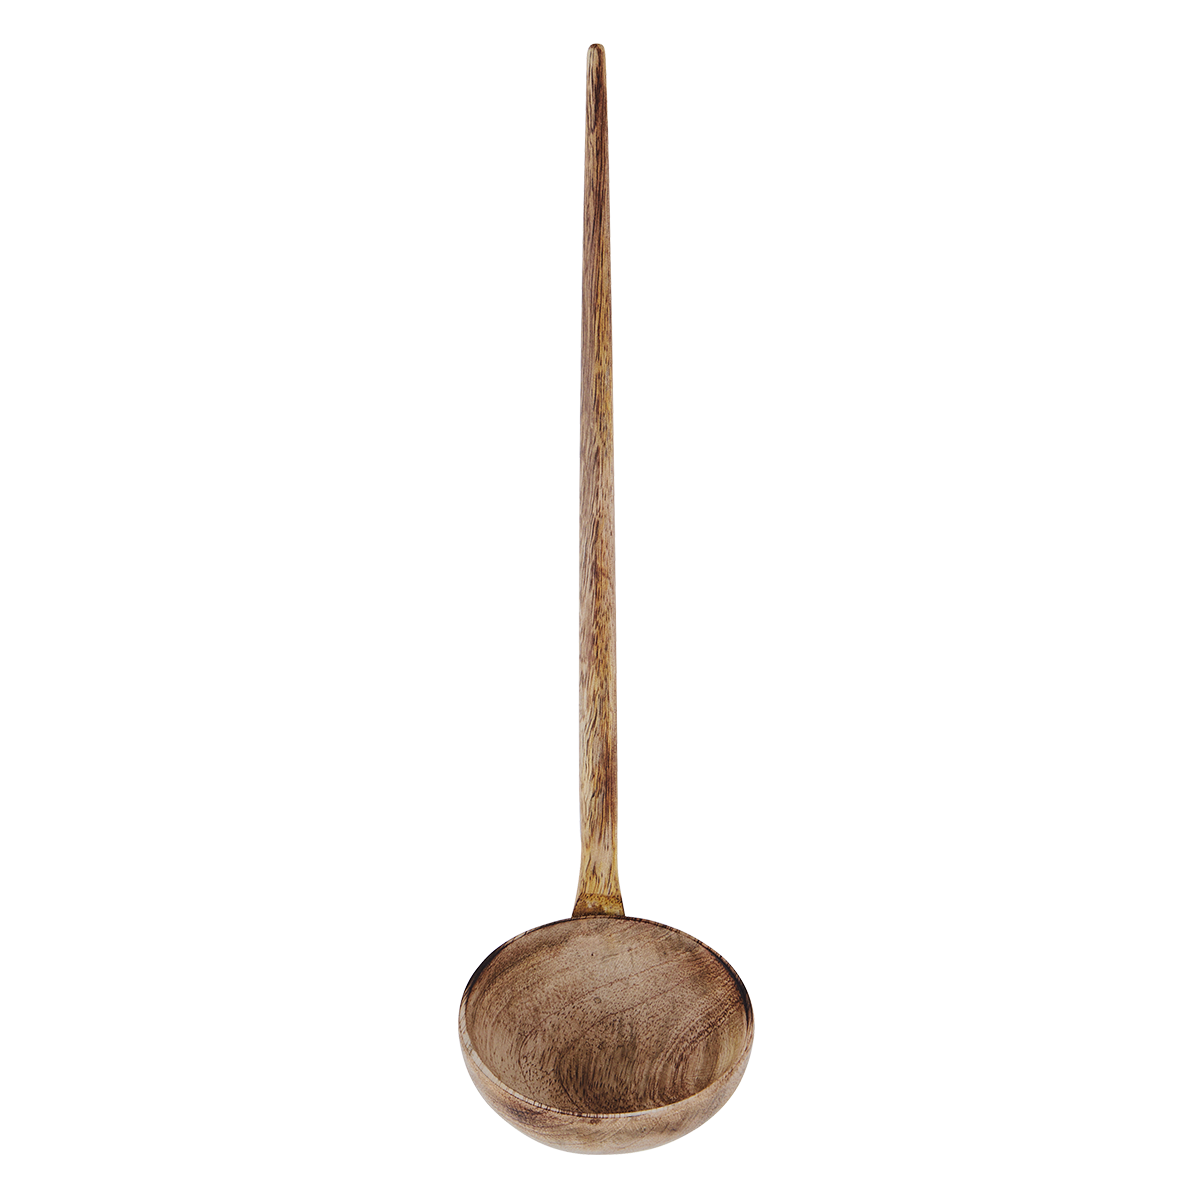 Hand carved wooden ladle